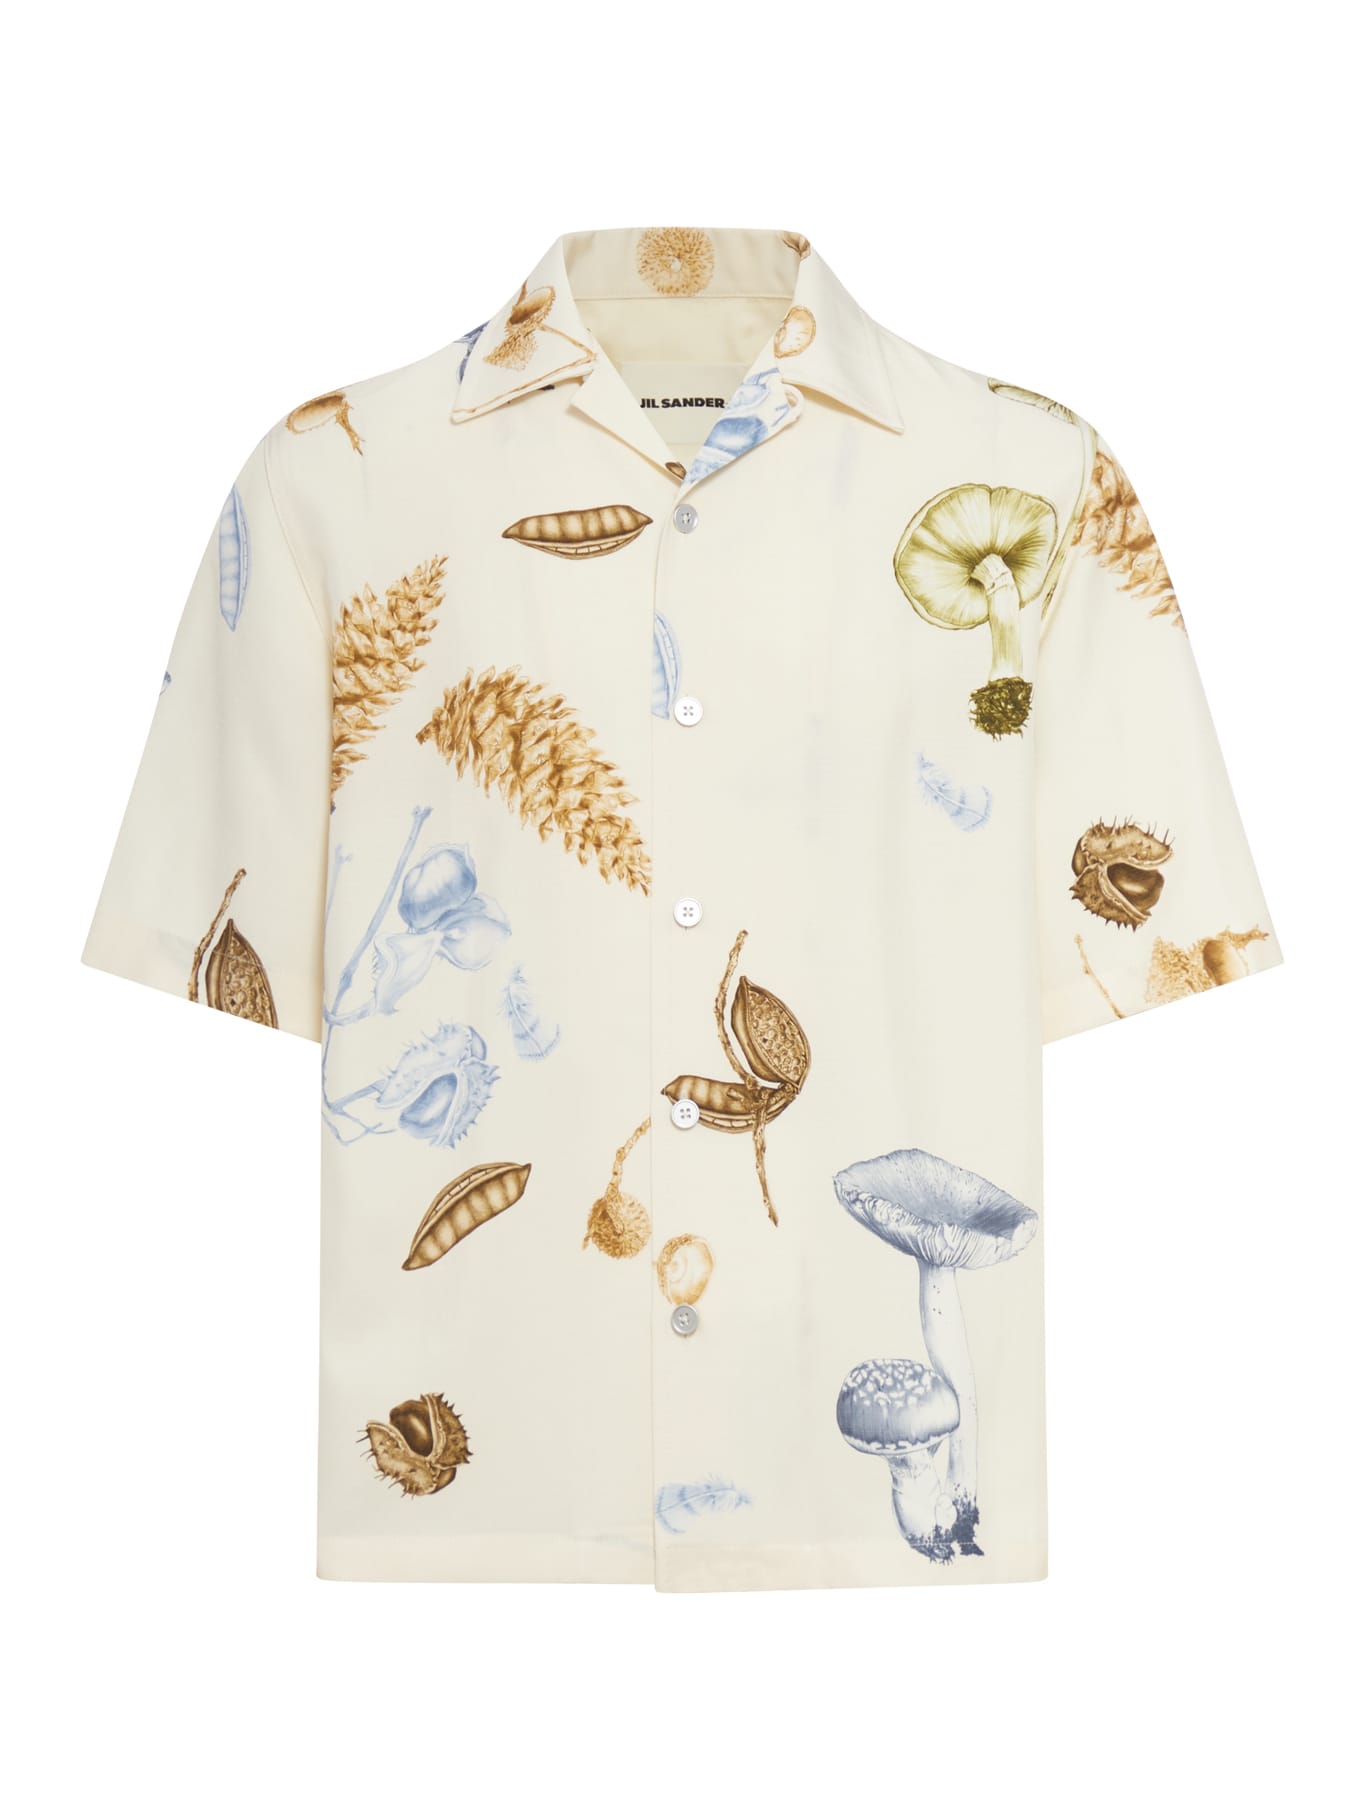 Jil Sander Boxy Fit Short Sleeve Shirt, Flat Bowling Collar, Front Closure With Five Buttons,straight Hem In Multi